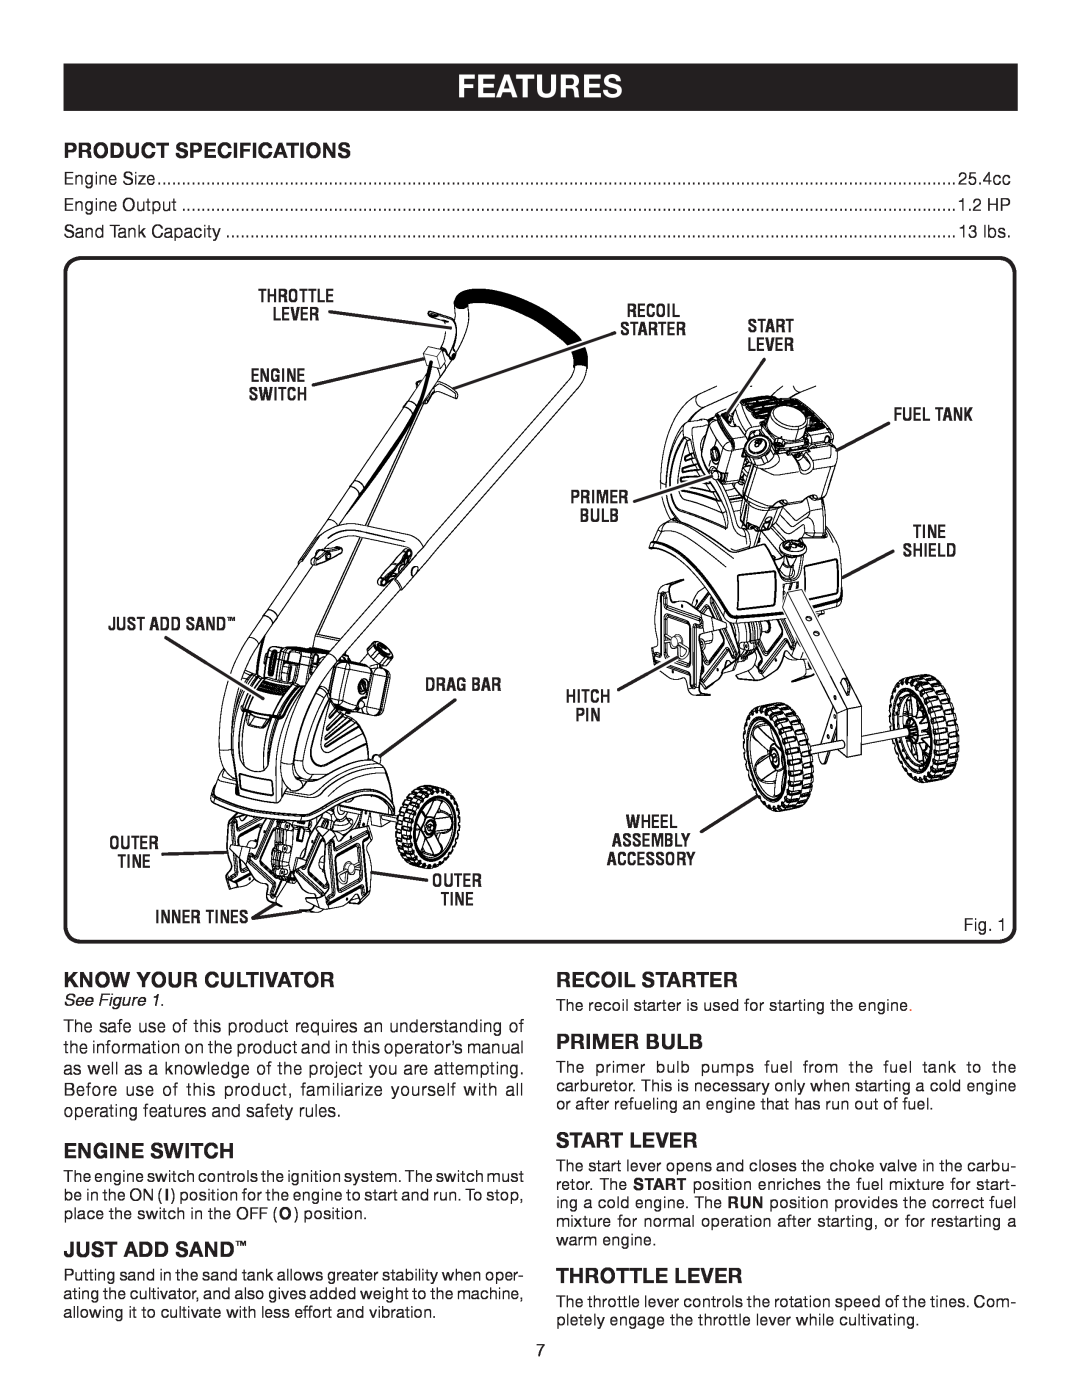 Ryobi RY60512 Features, Product Specifications, Know Your Cultivator, Recoil Starter, Primer Bulb, Engine Switch, Lever 